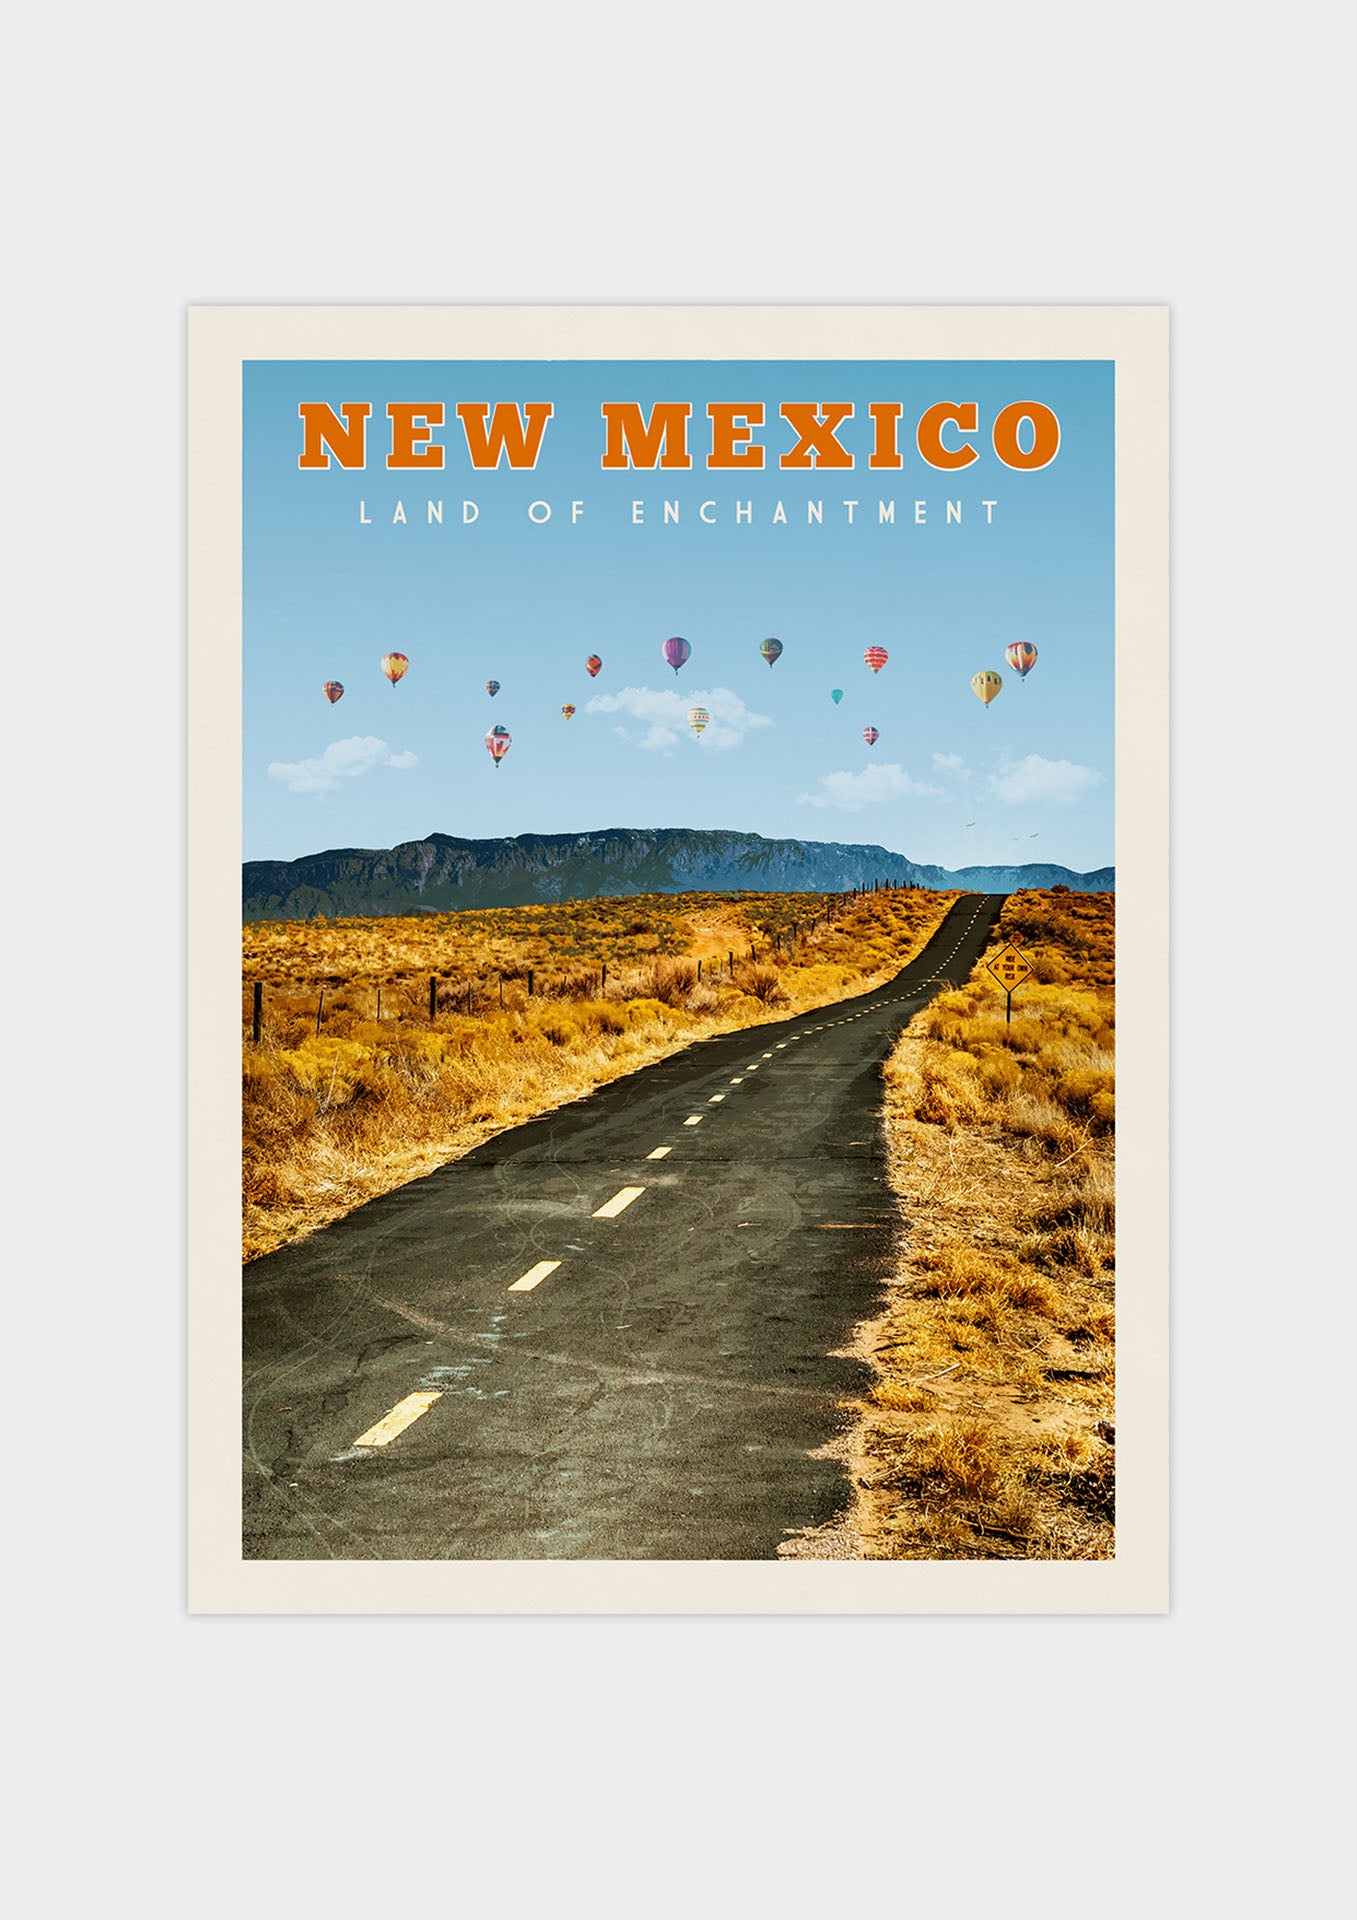 New Mexico Vintage Wall Art Travel Poster | Vintaprints